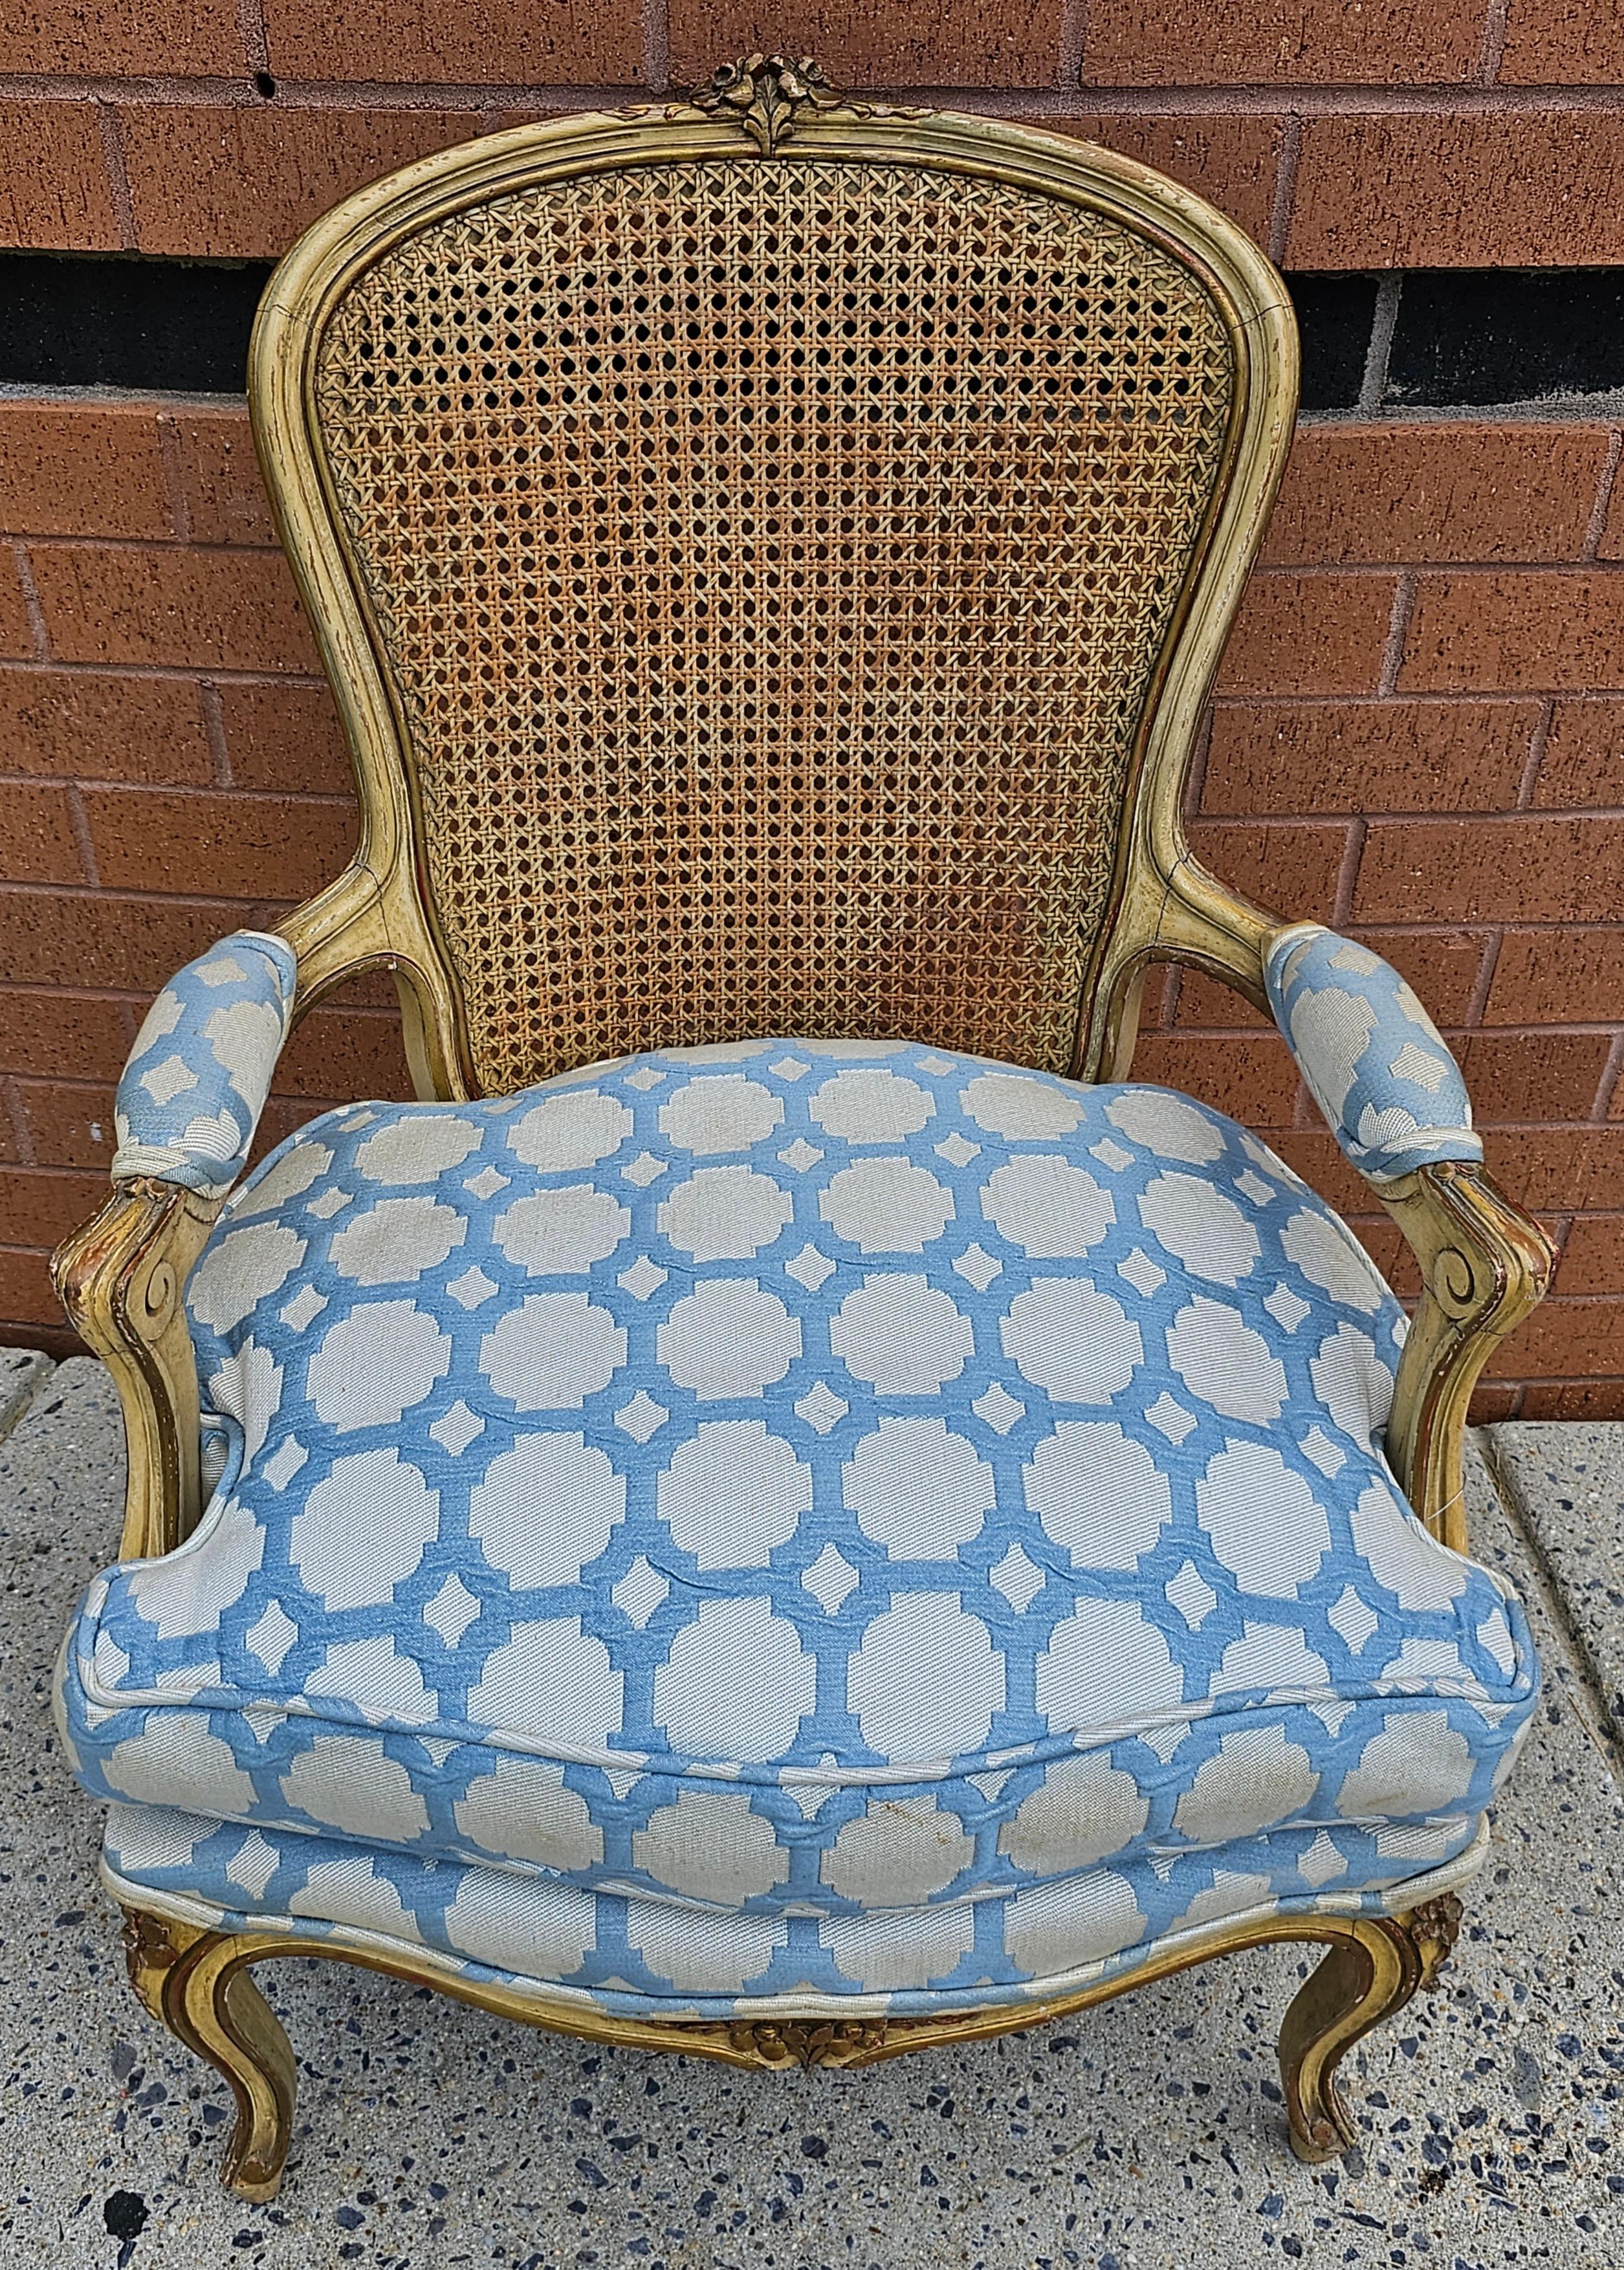 A French Provincial style Yellowish Enamel, Caned Back And Upholstered Seat Bergere Chair in very good vintage condition.  Duck feather soft seat cushion. Measures 25